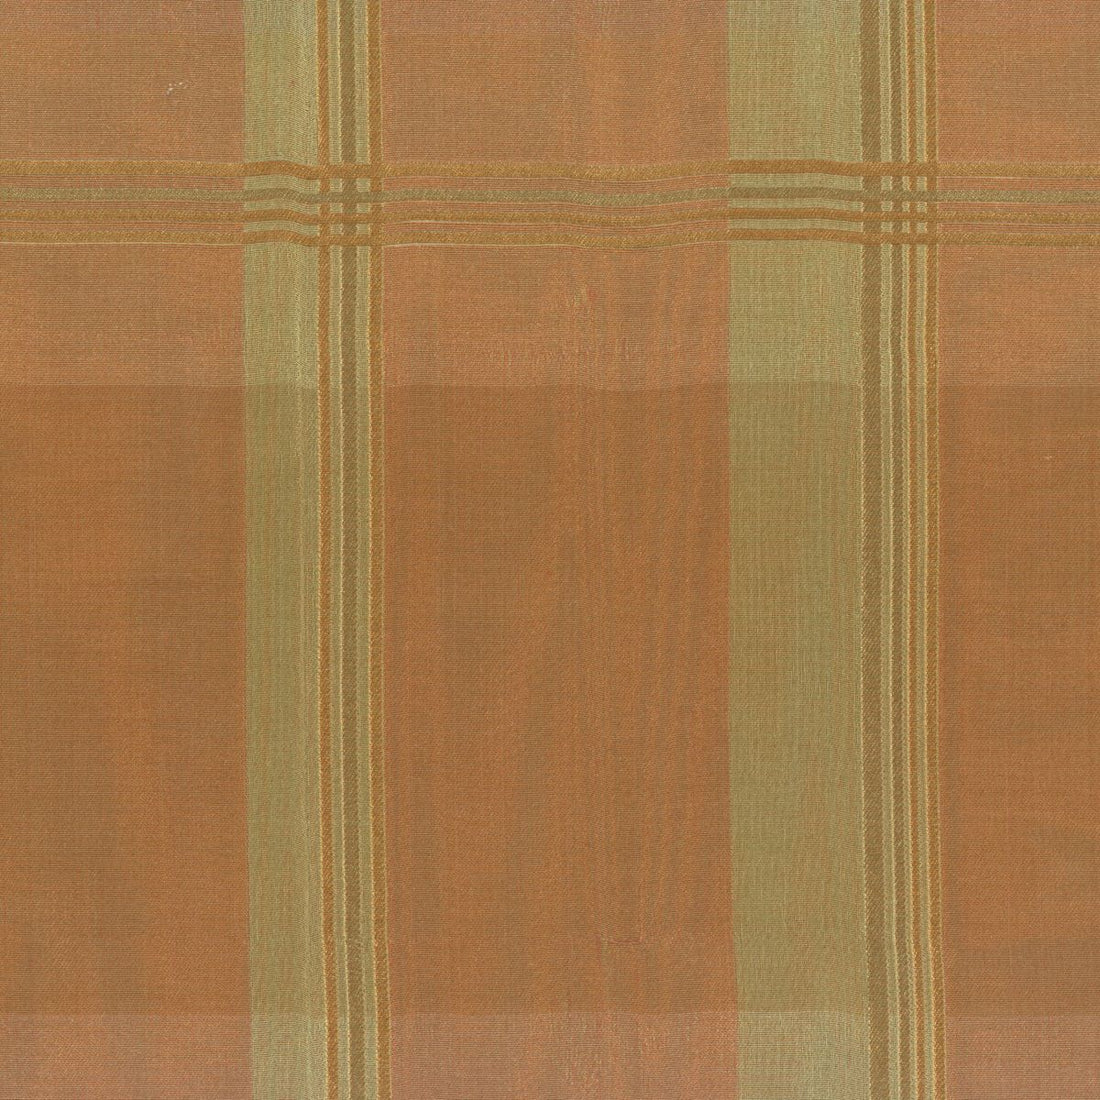 Iridescent Plaid fabric in terracotta color - pattern number HB 00031540 - by Scalamandre in the Old World Weavers collection